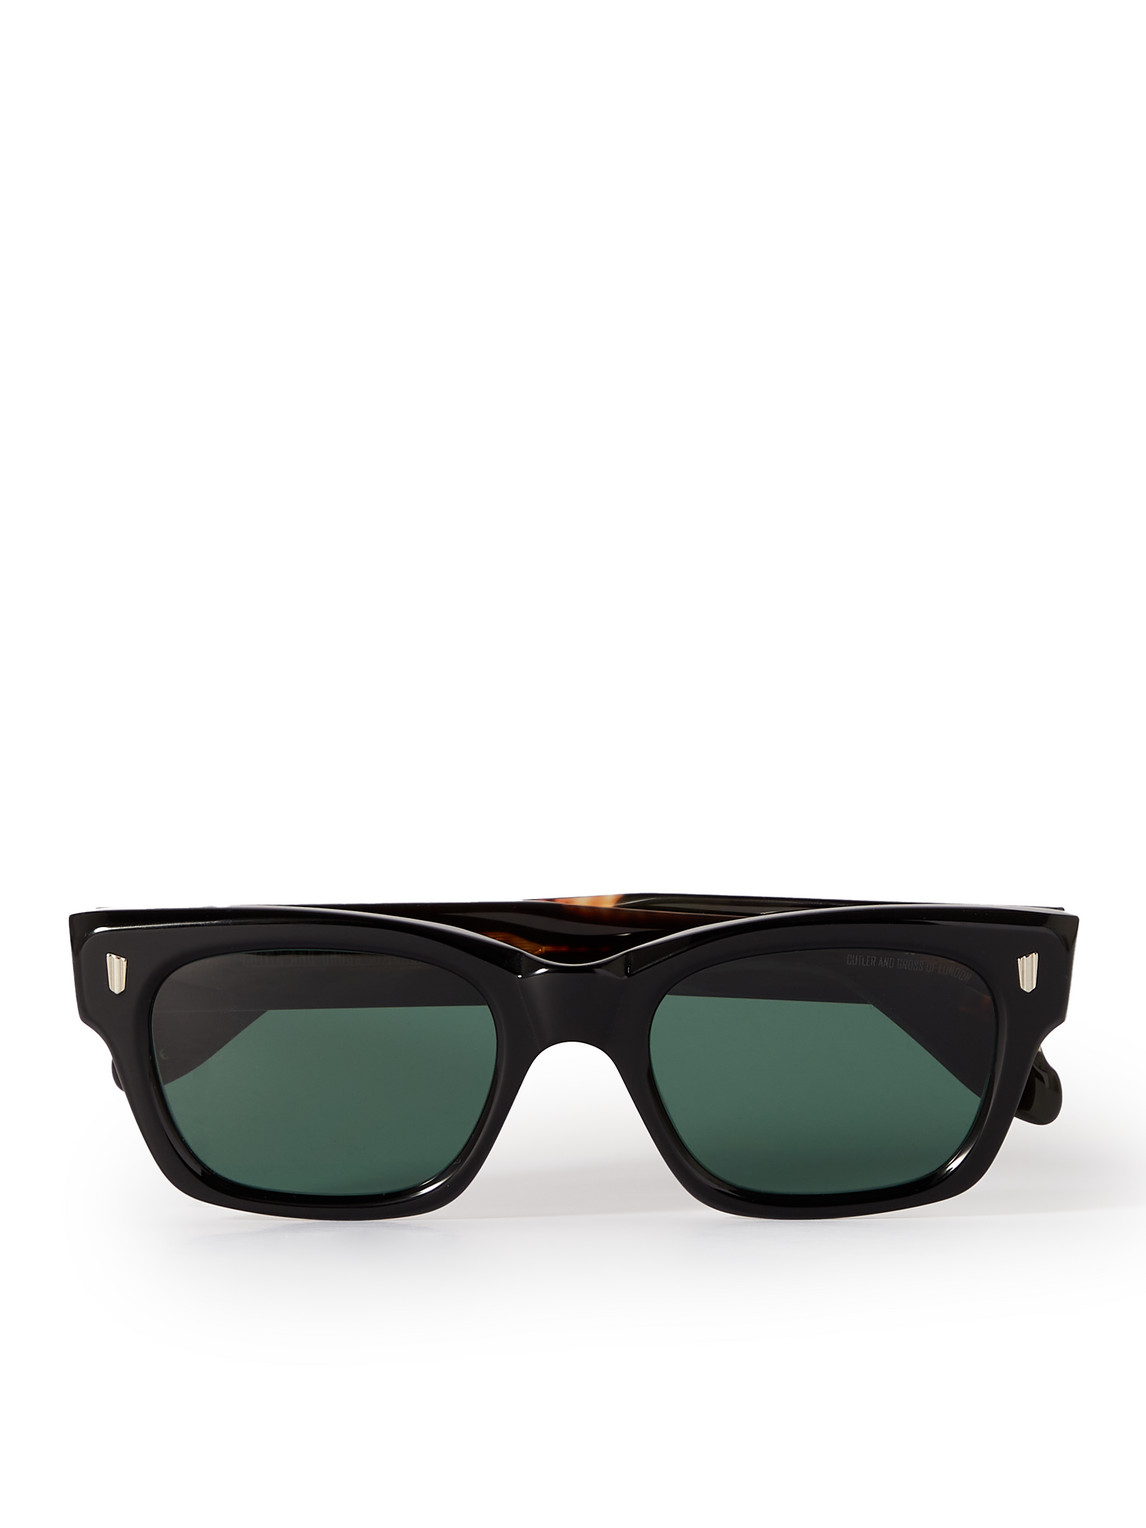 Cutler And Gross 1391 Square-frame Acetate Sunglasses In Black